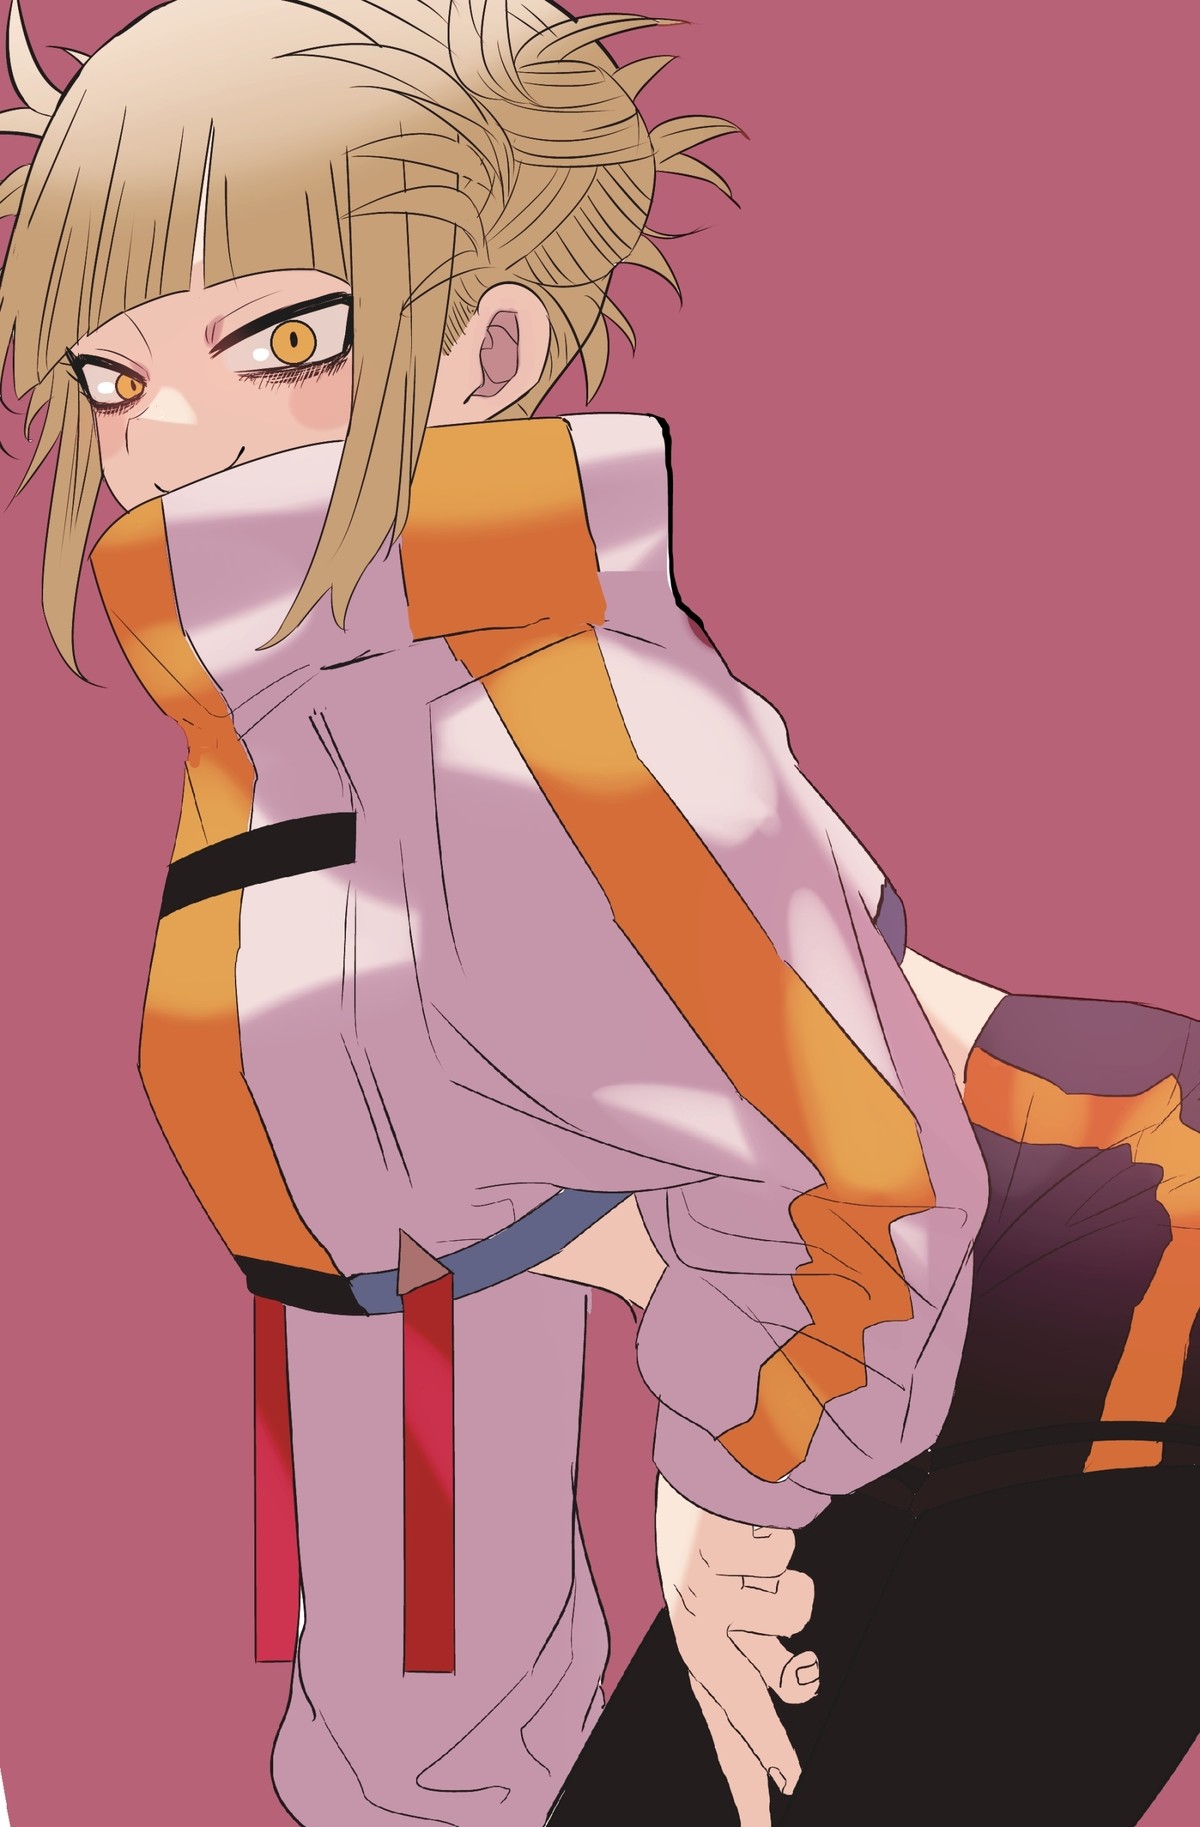 Daily Toga - 824: New Jacket. join list: DailyToga (477 subs)Mention History Source: .. that's a nice jacket